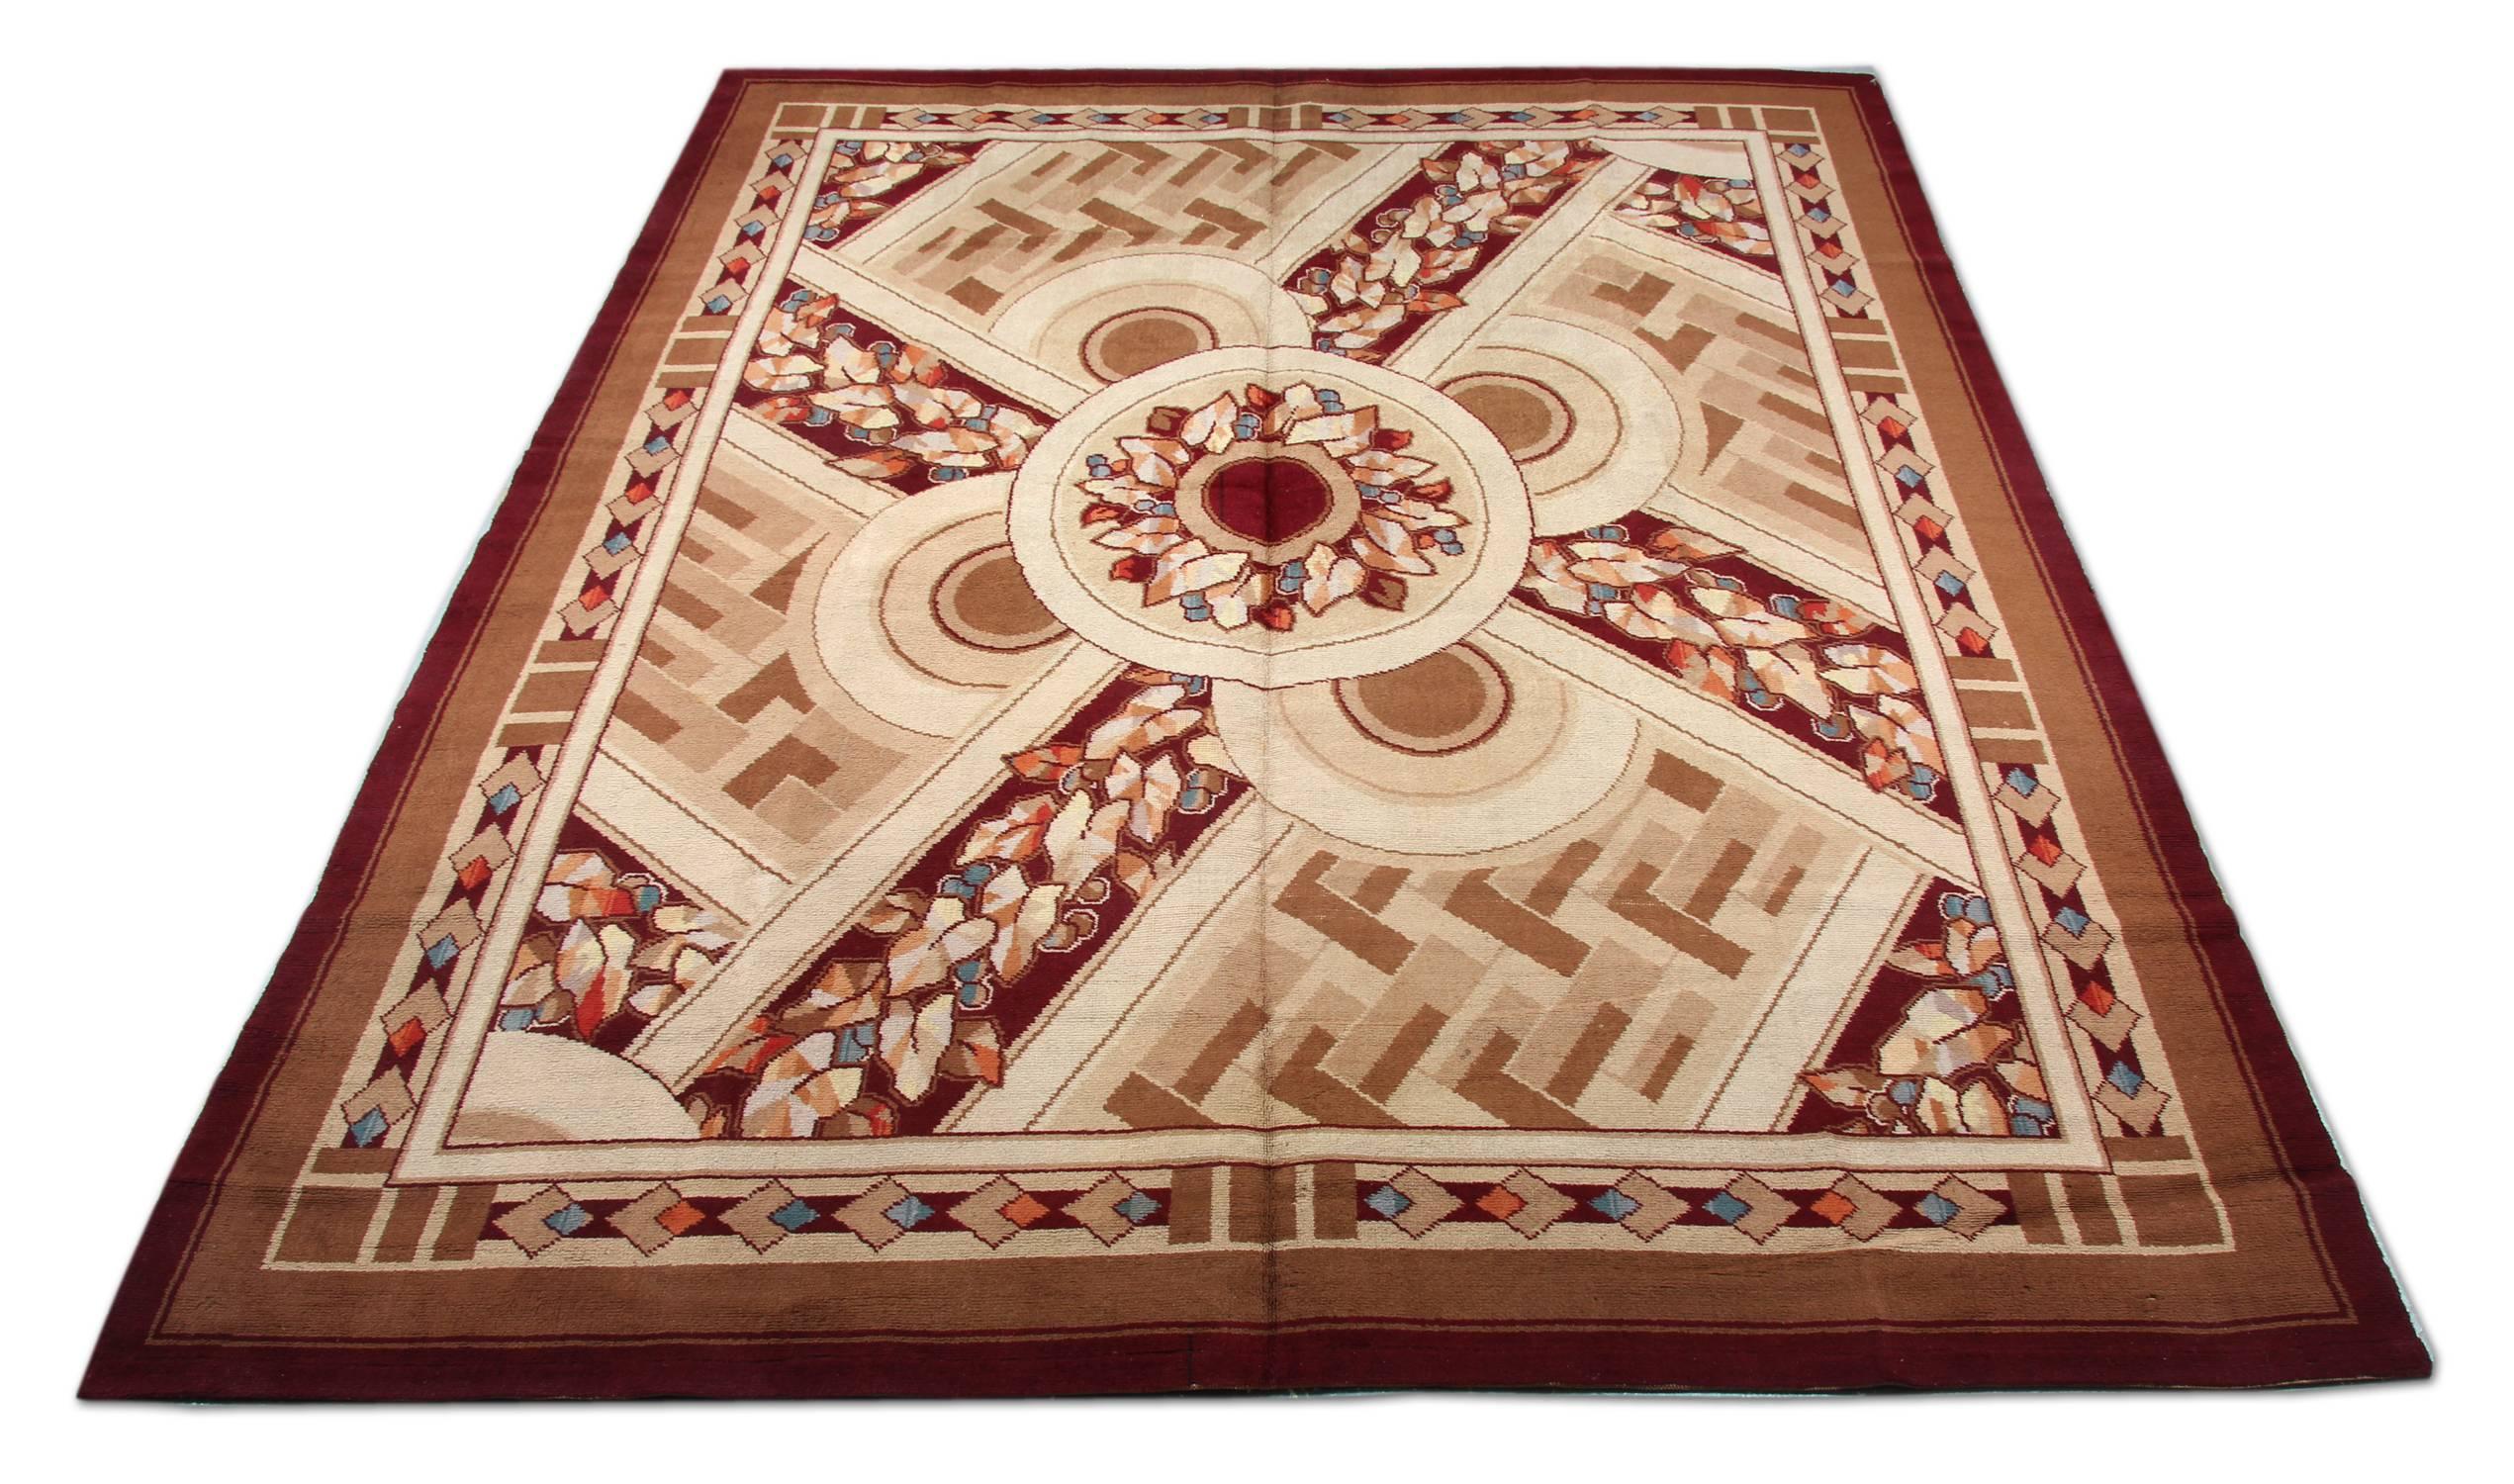 An excellent example of handmade carpet Art & Craft wool rugs. This golden brown rug has different sand colours and floral rug design. This geometric rug also has a deep brown border and matching floral shapes. These extra-large oriental rugs look